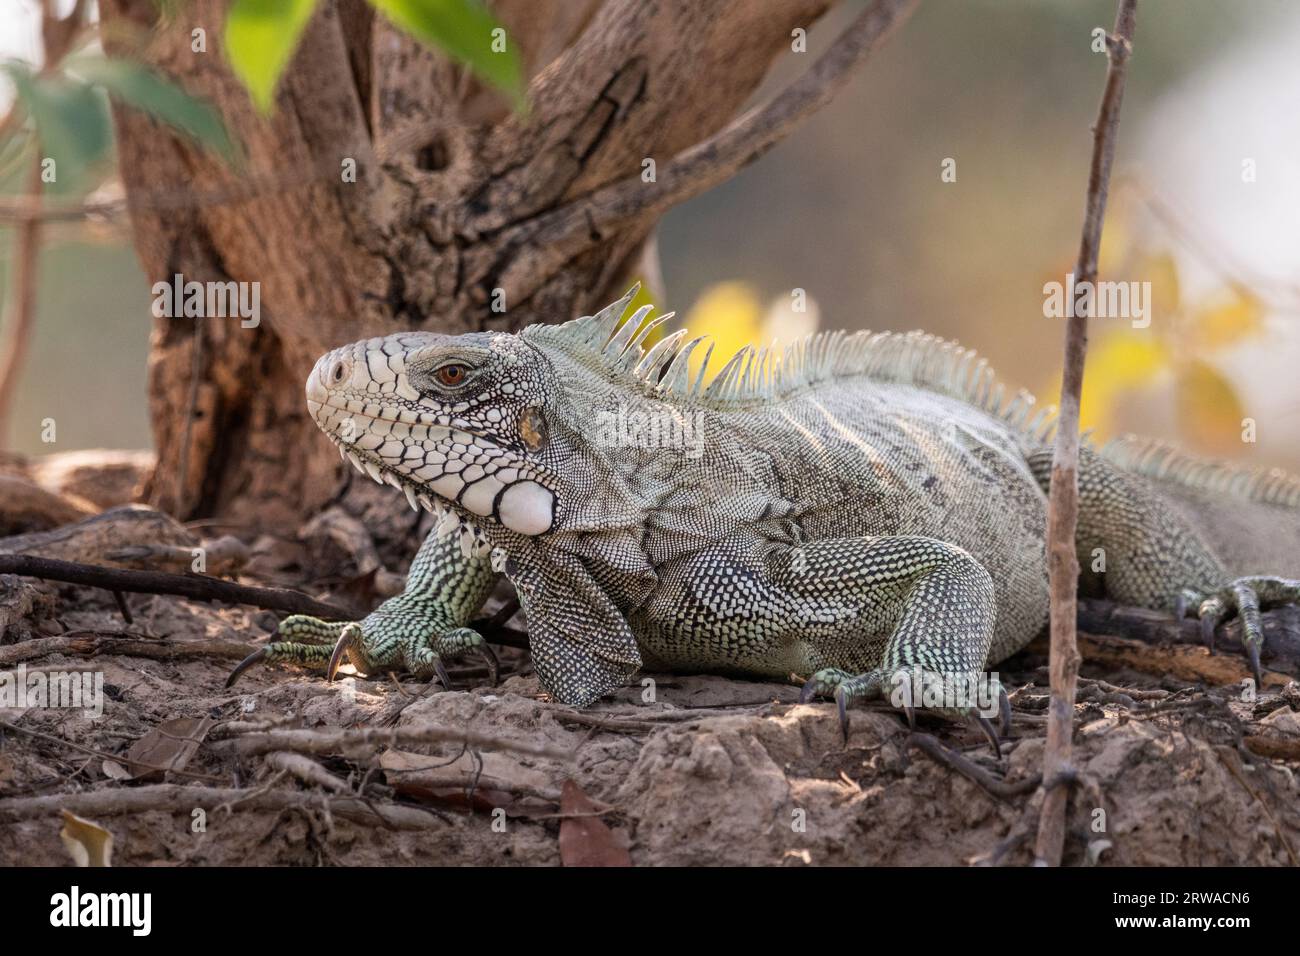 Beautiful view to Iguana lizzard by the Pixaim River side in the Pantanal of Poconé, Mato Grosso State, Brazil Stock Photo